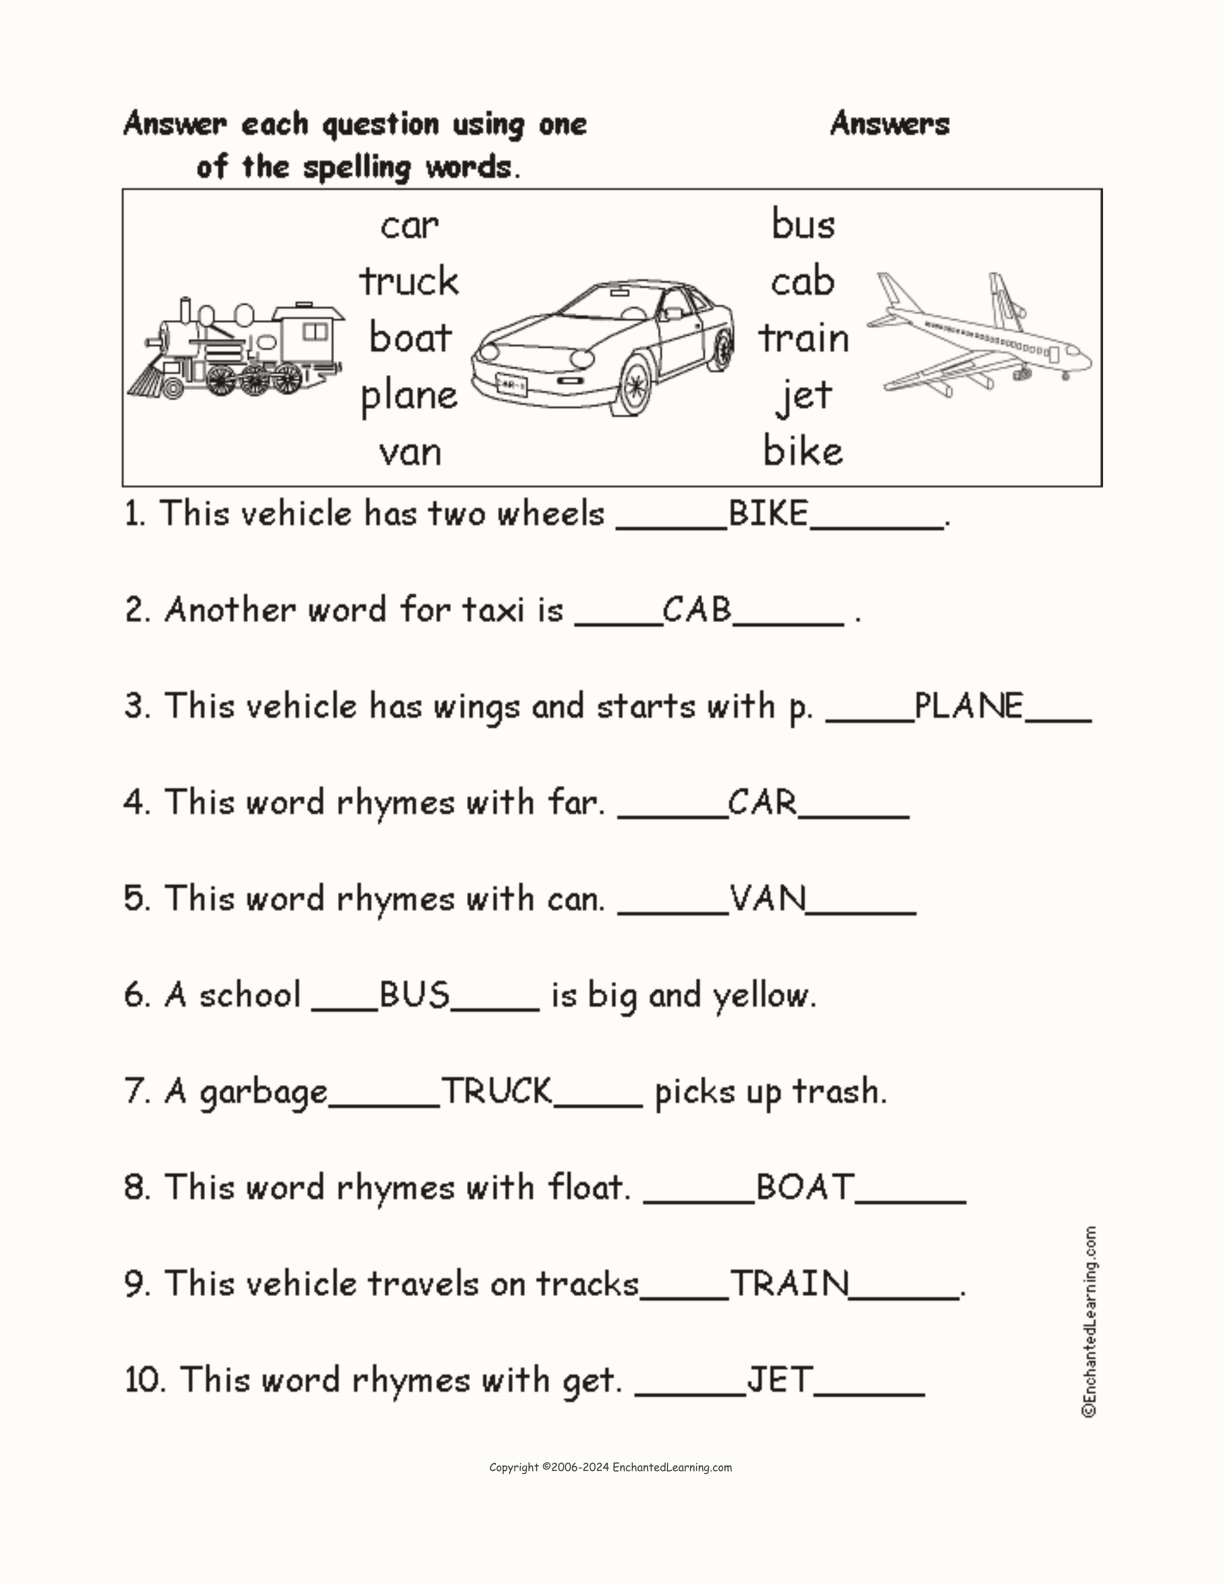 Vehicle Spelling Word Questions interactive worksheet page 2